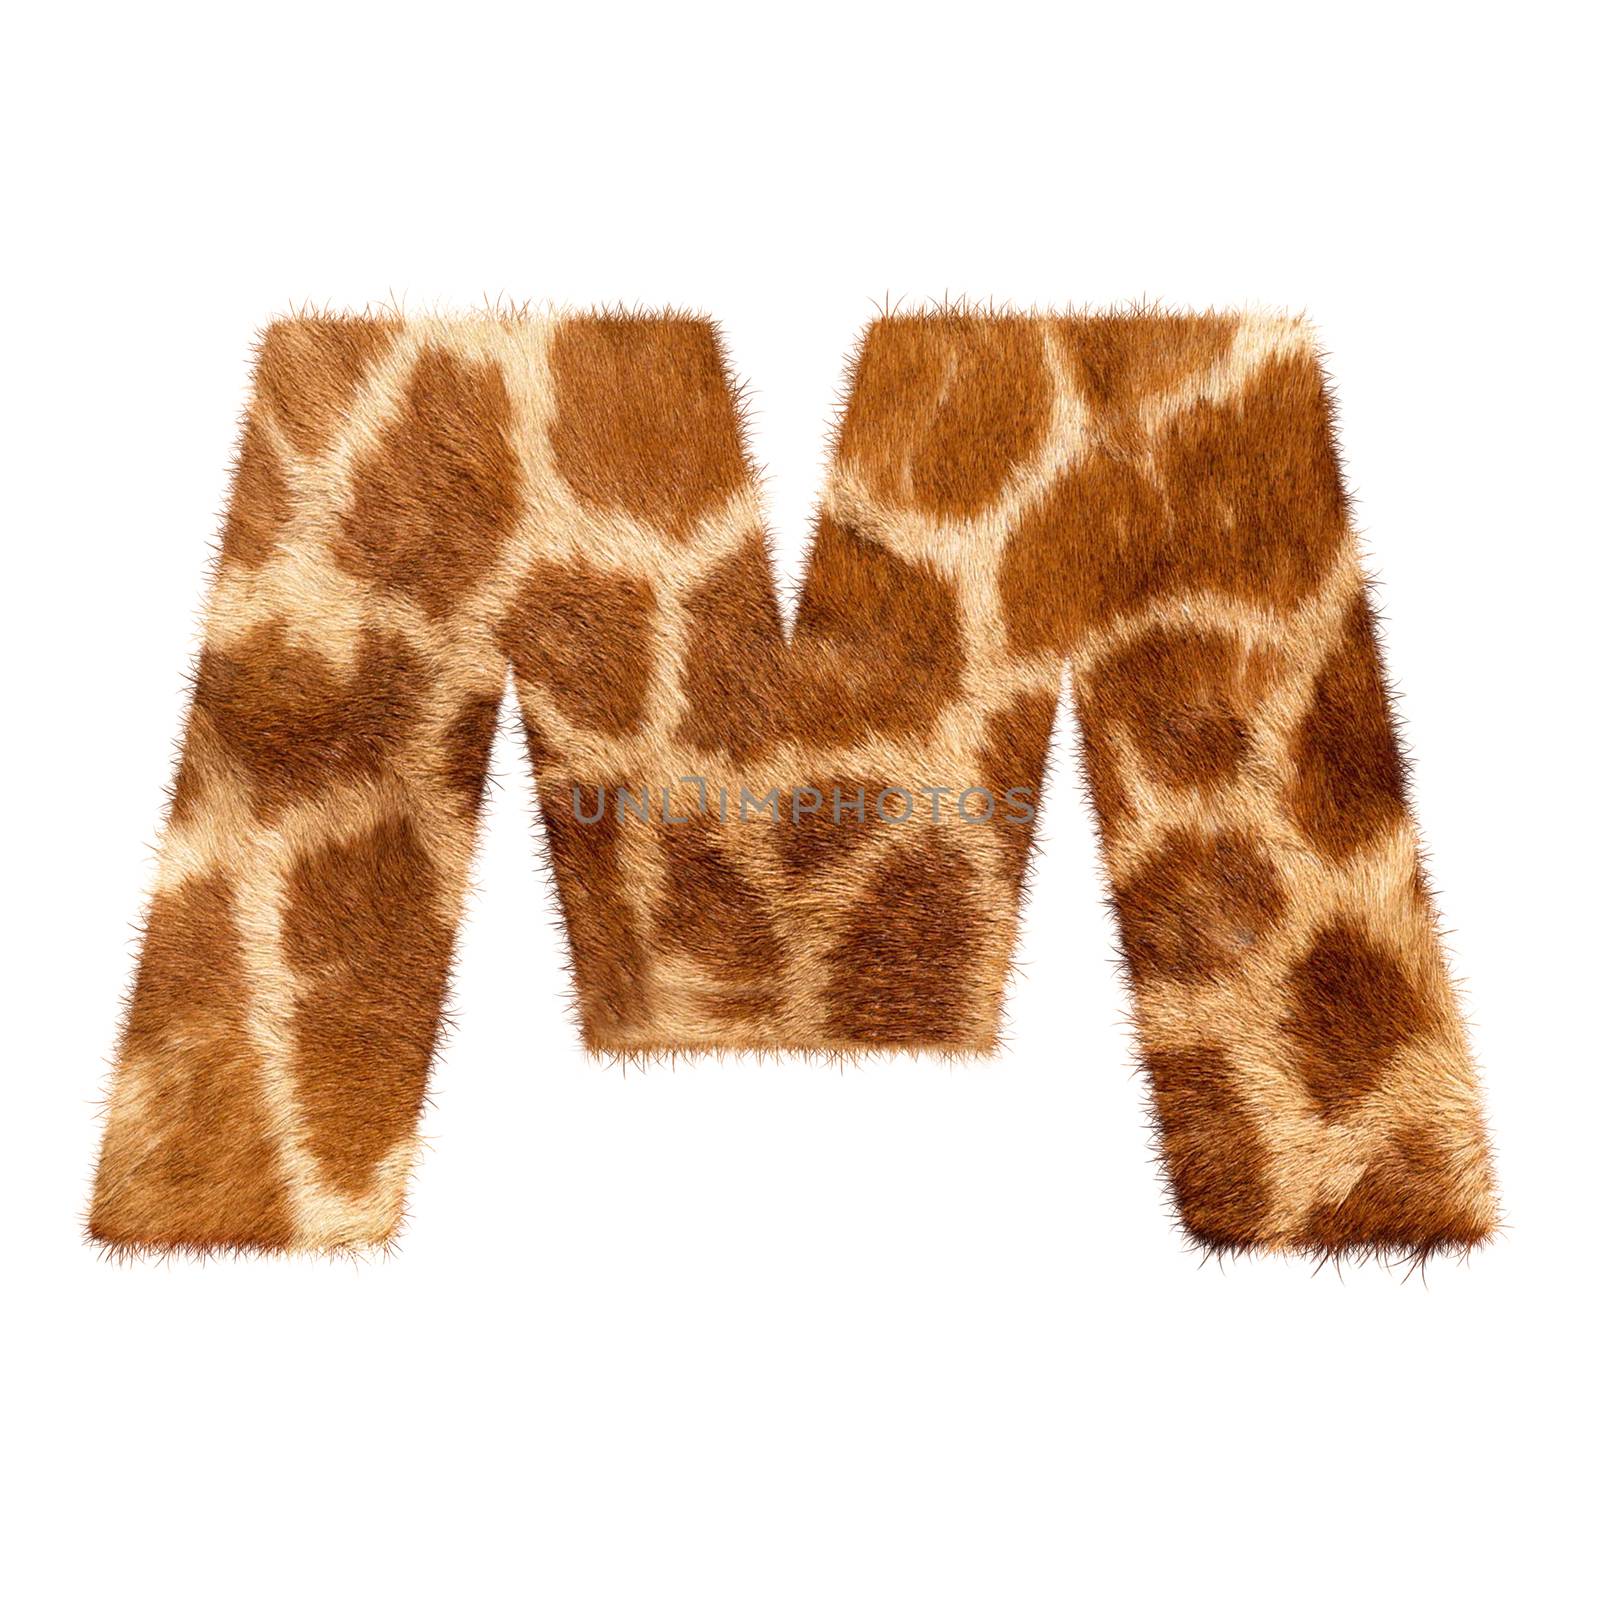 Letter from giraffe style fur alphabet. Isolated on white background. With clipping path. 